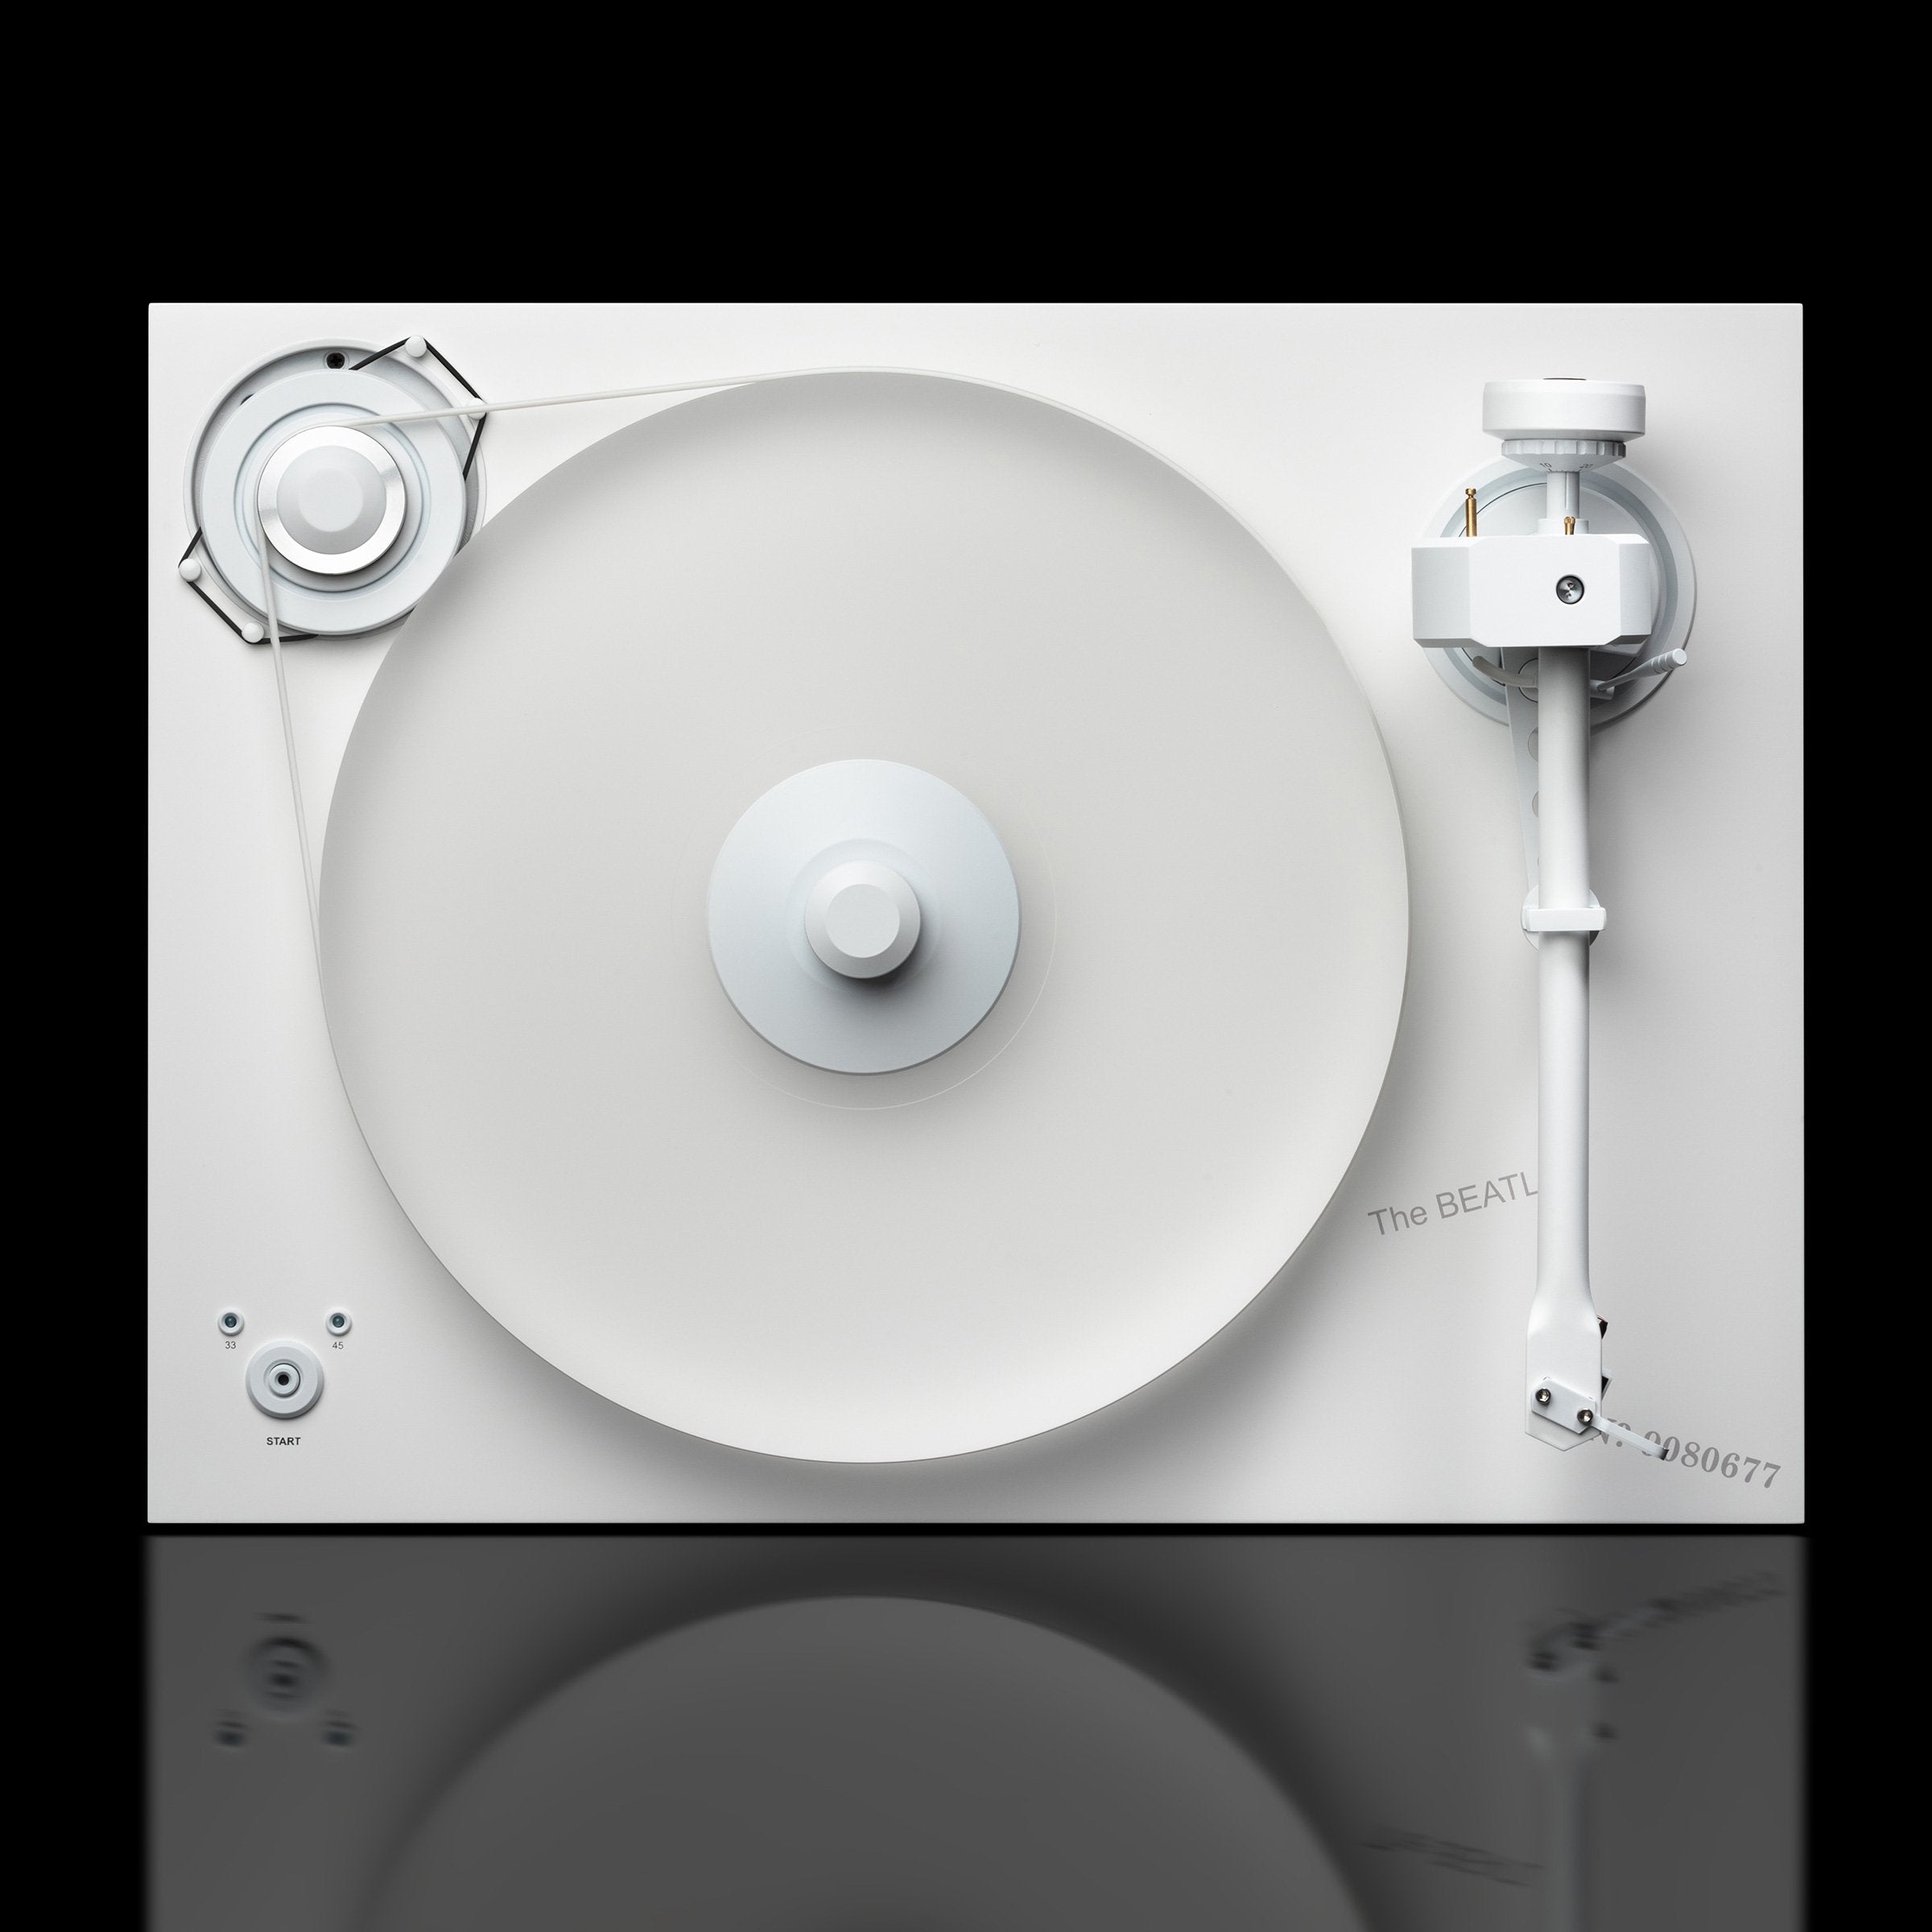 Pro-Ject: 2Xperience SB Turntable - The Beatles White Album Edition